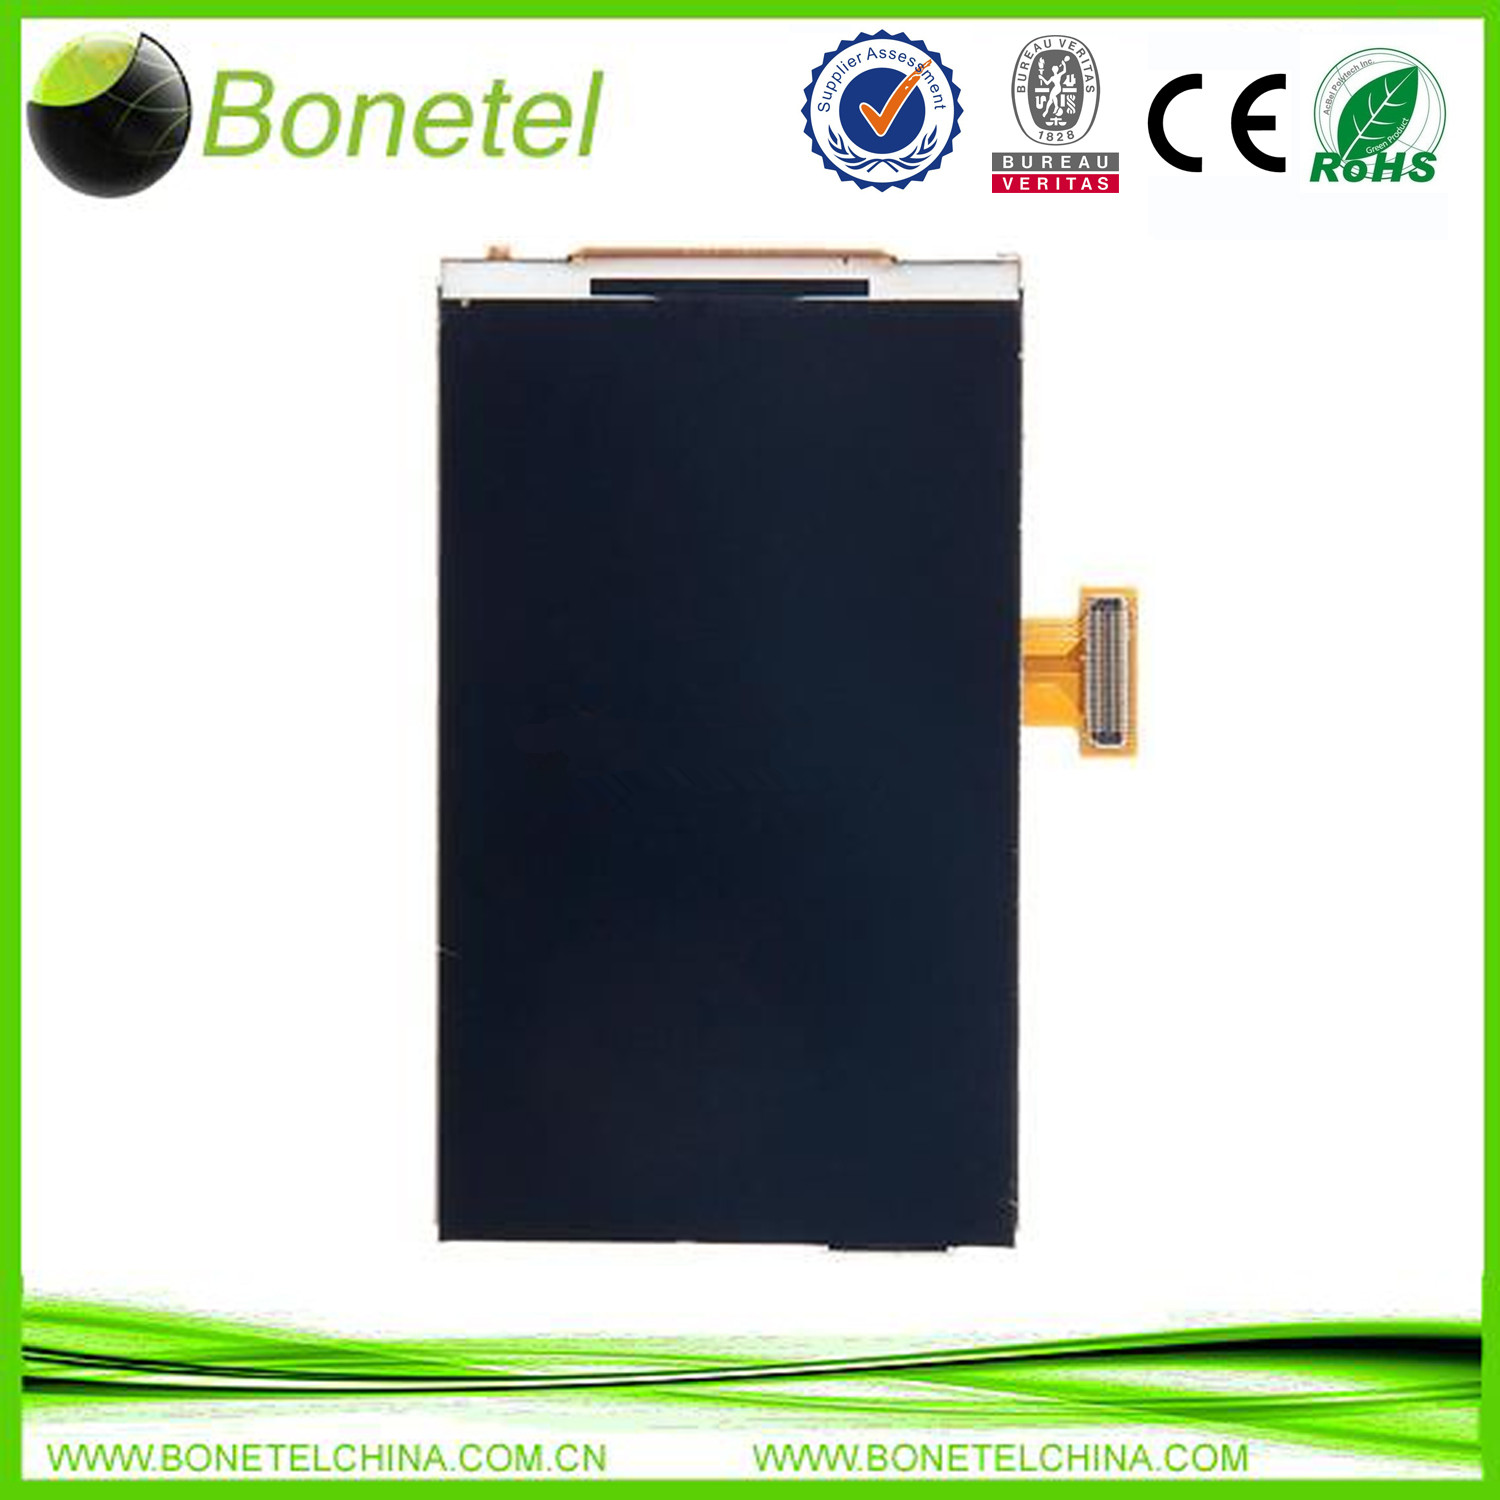 LCD Screen Display Panel Replacement Parts for Samsung Exhibit II 2 4G T679 A